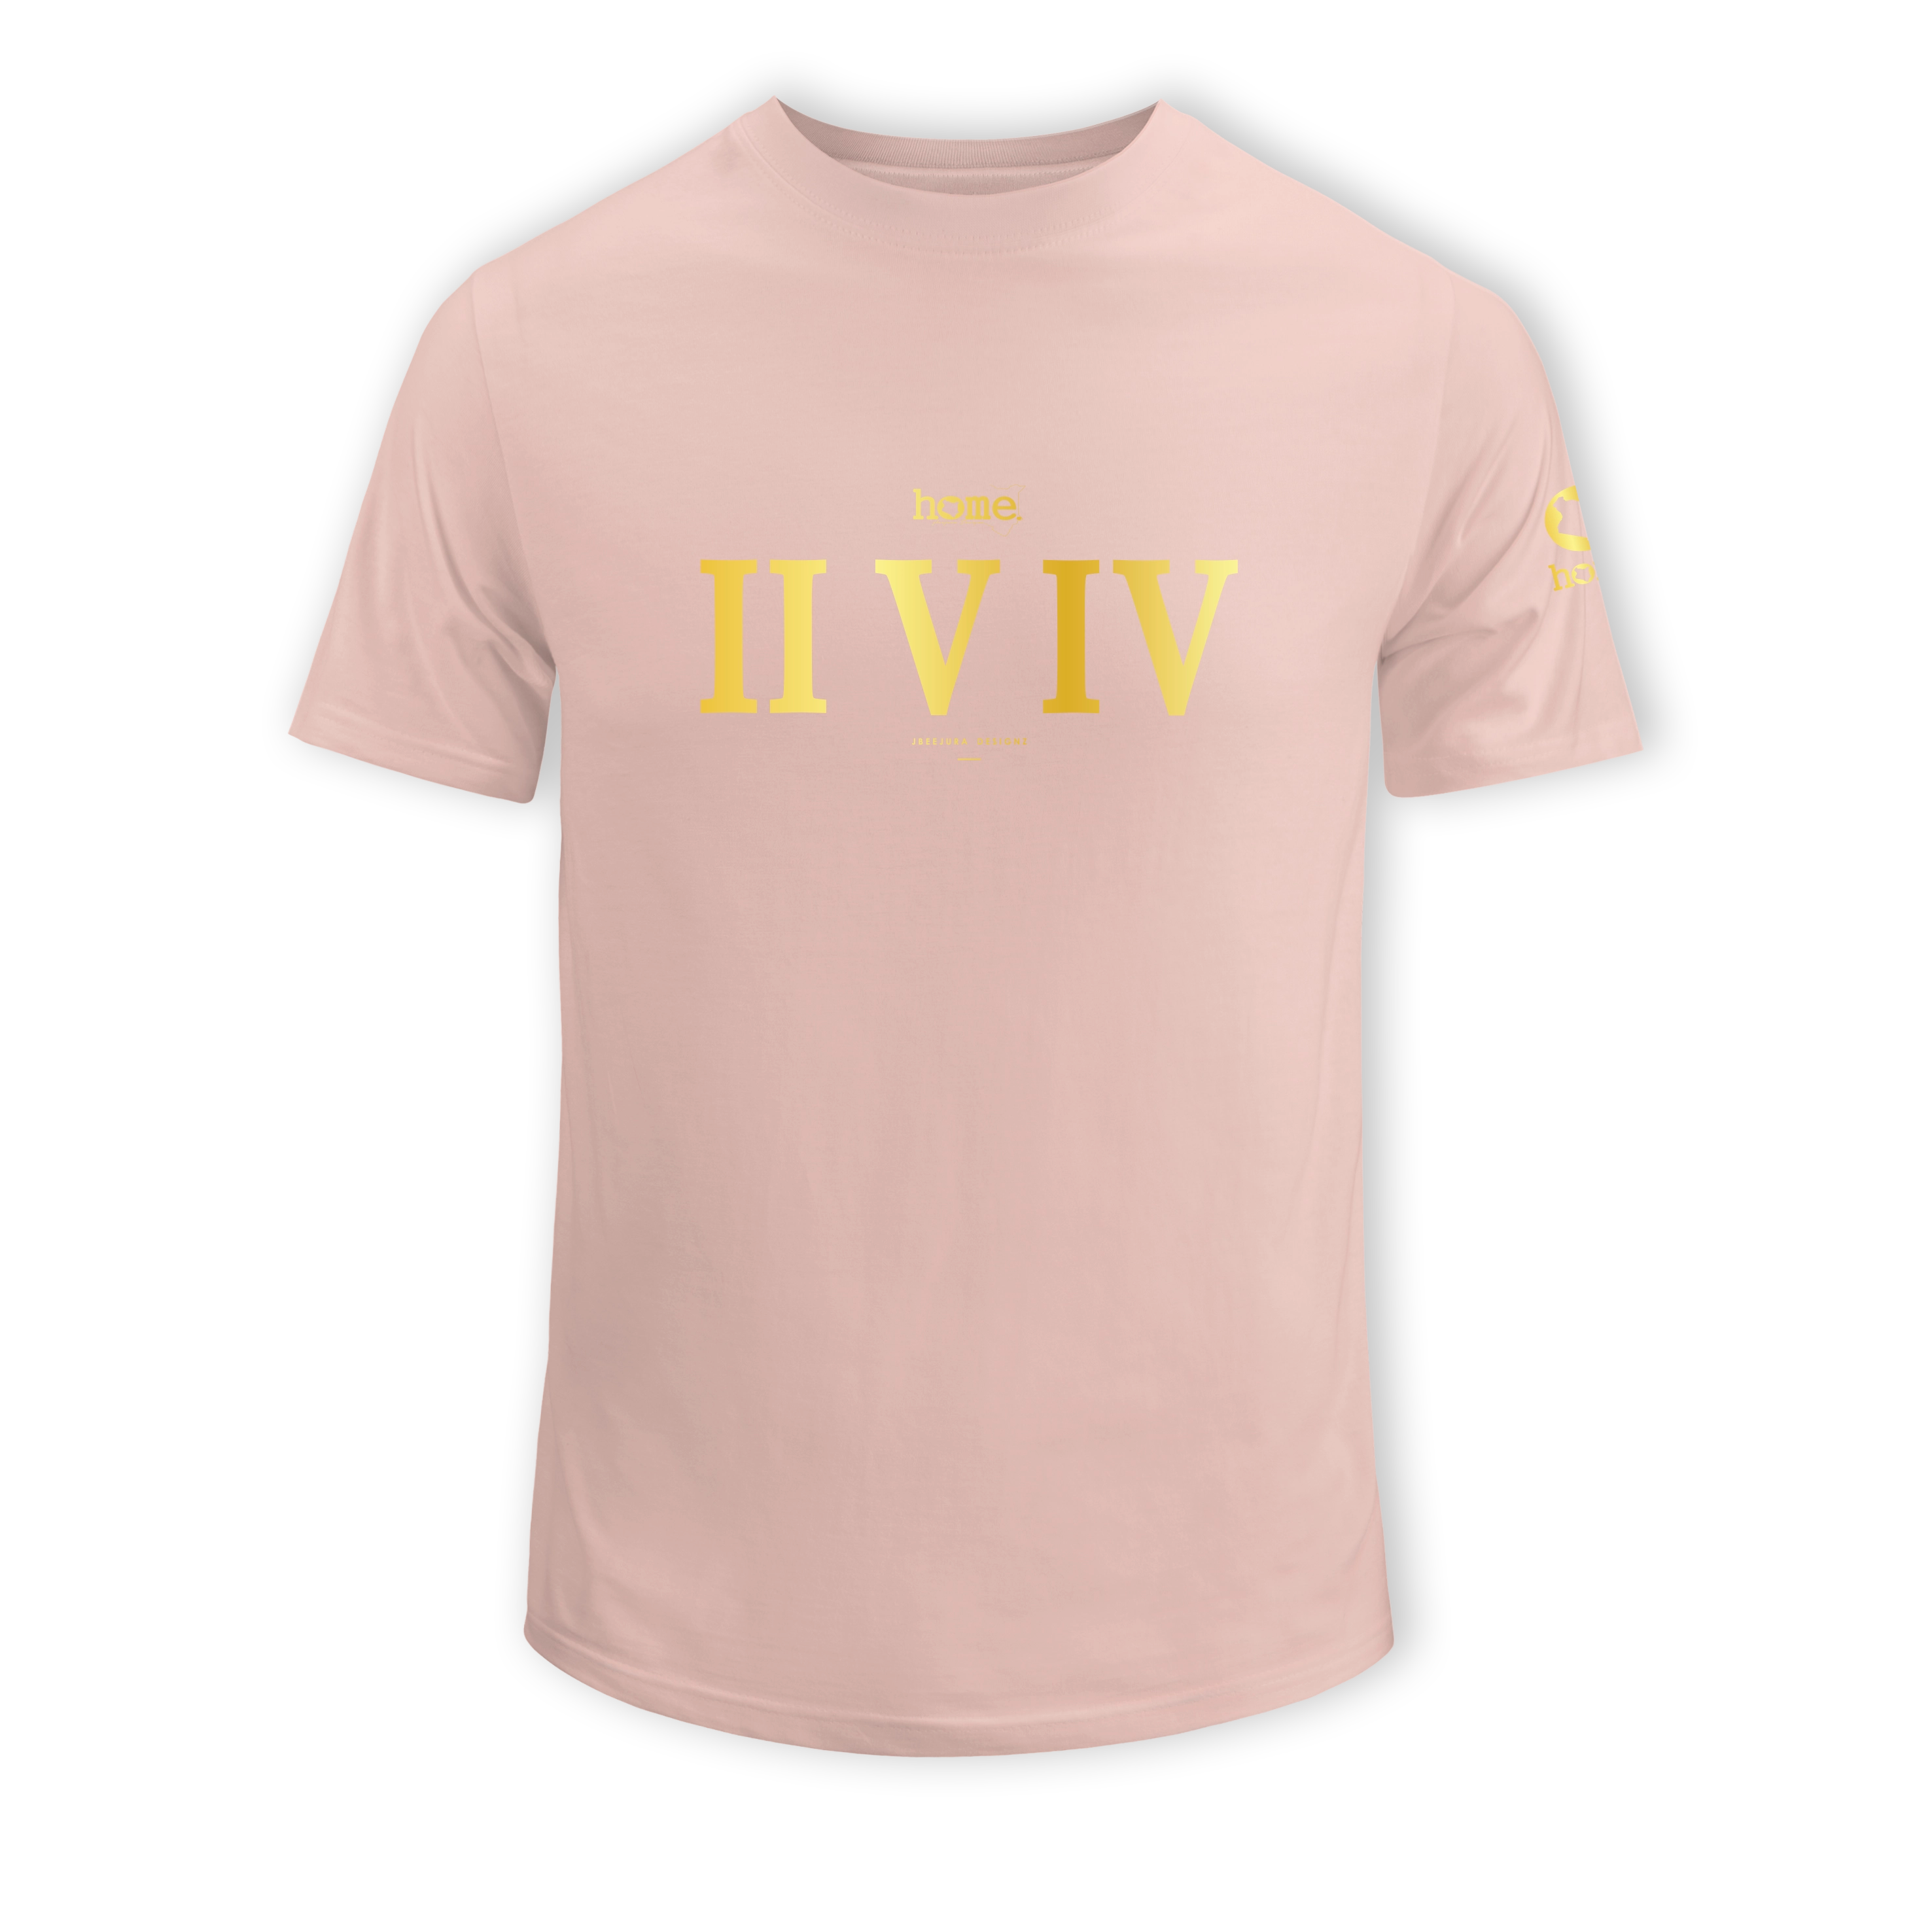 home_254 SHORT-SLEEVED PEACH T-SHIRT WITH A GOLD ROMAN NUMERALS PRINT – COTTON PLUS FABRIC